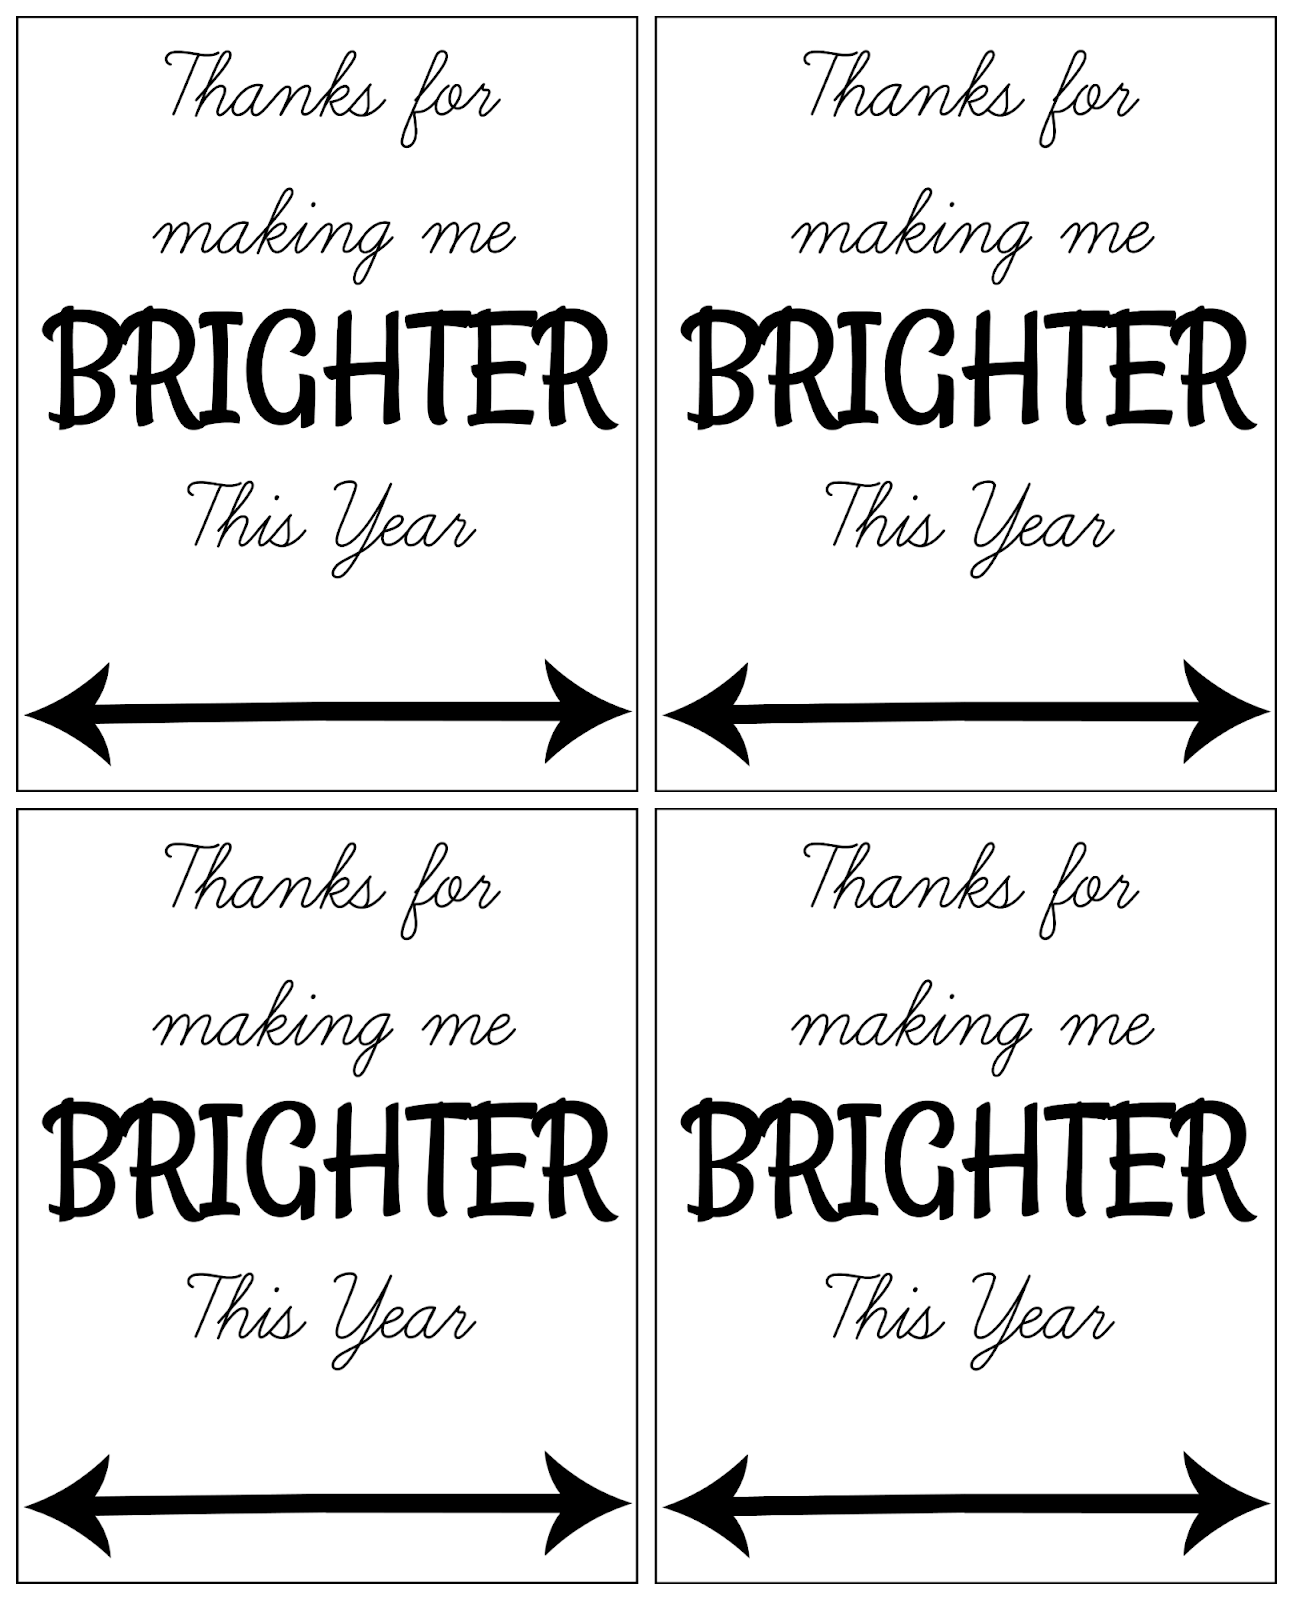 Thanks for Making Me Brighter - Teacher Appreciation Gift & Free ...